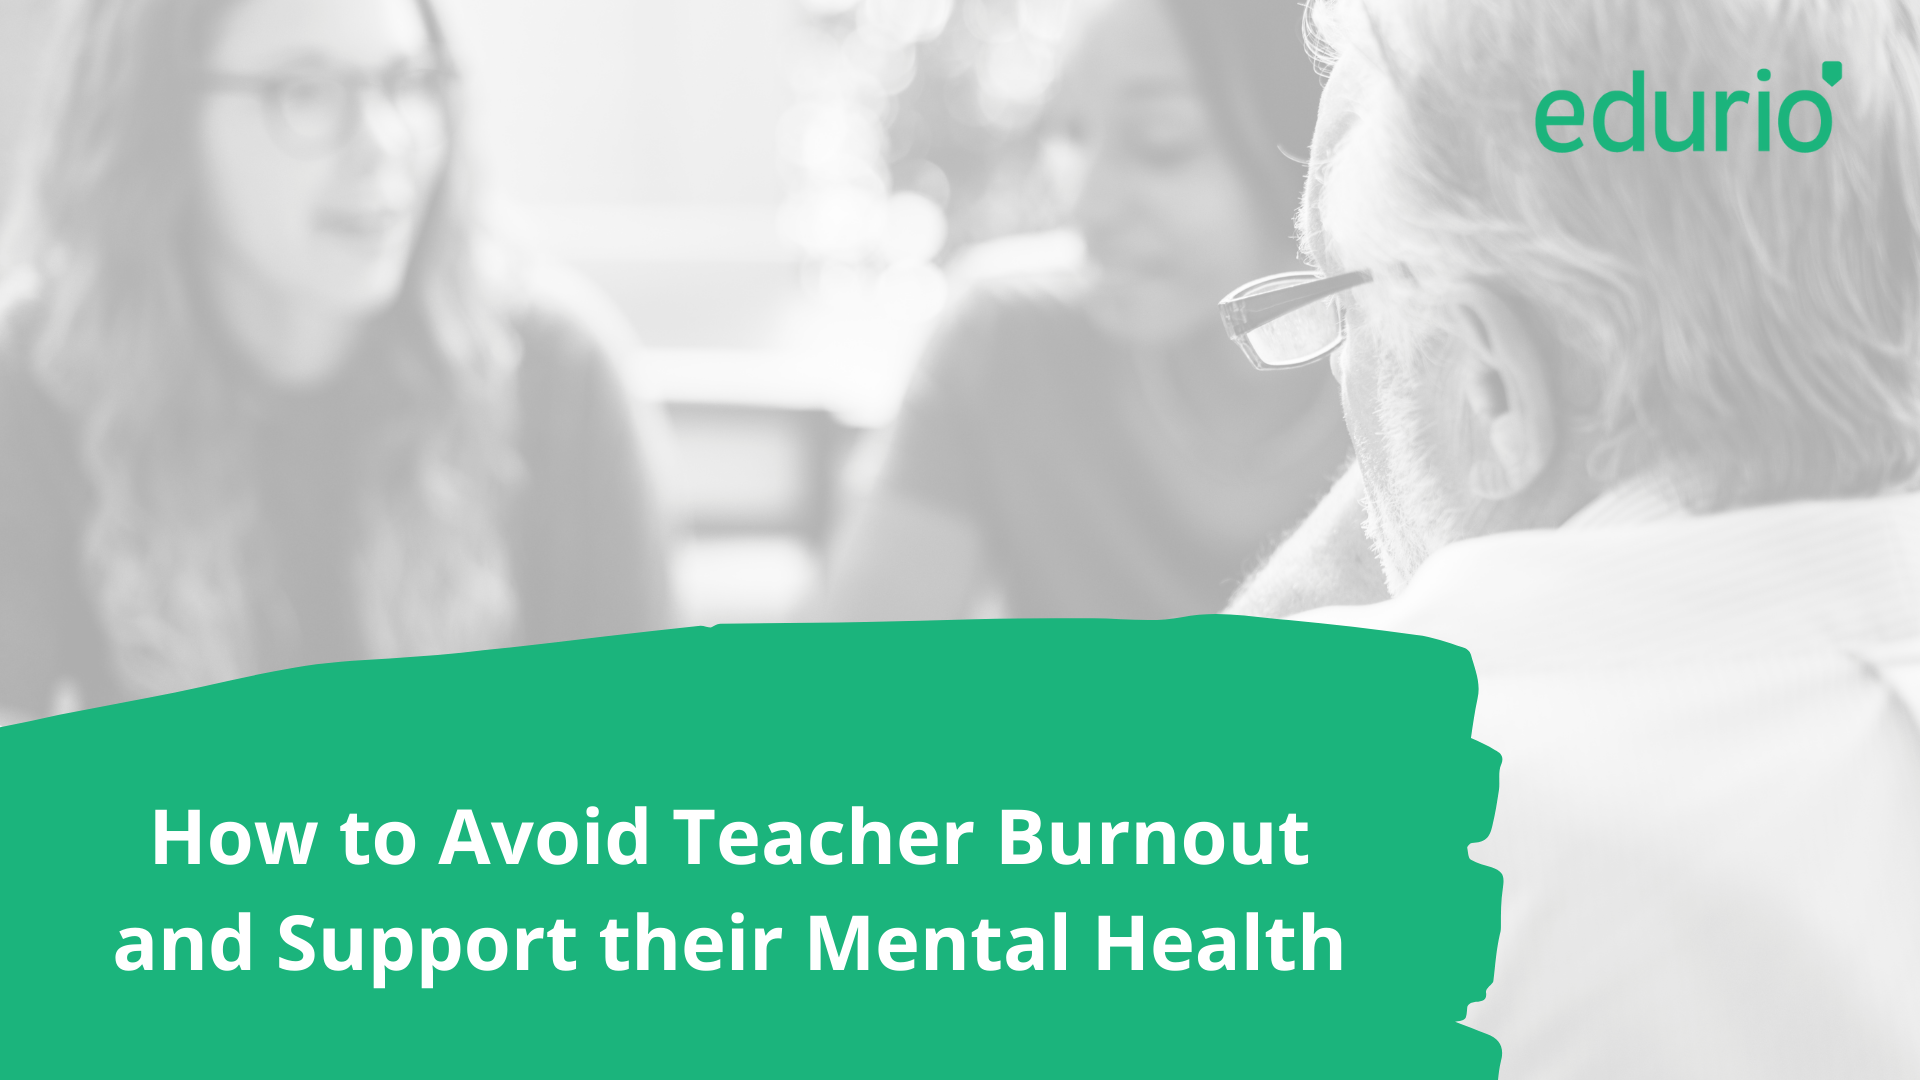 How to Avoid Teacher Burnout and Support their Mental Health